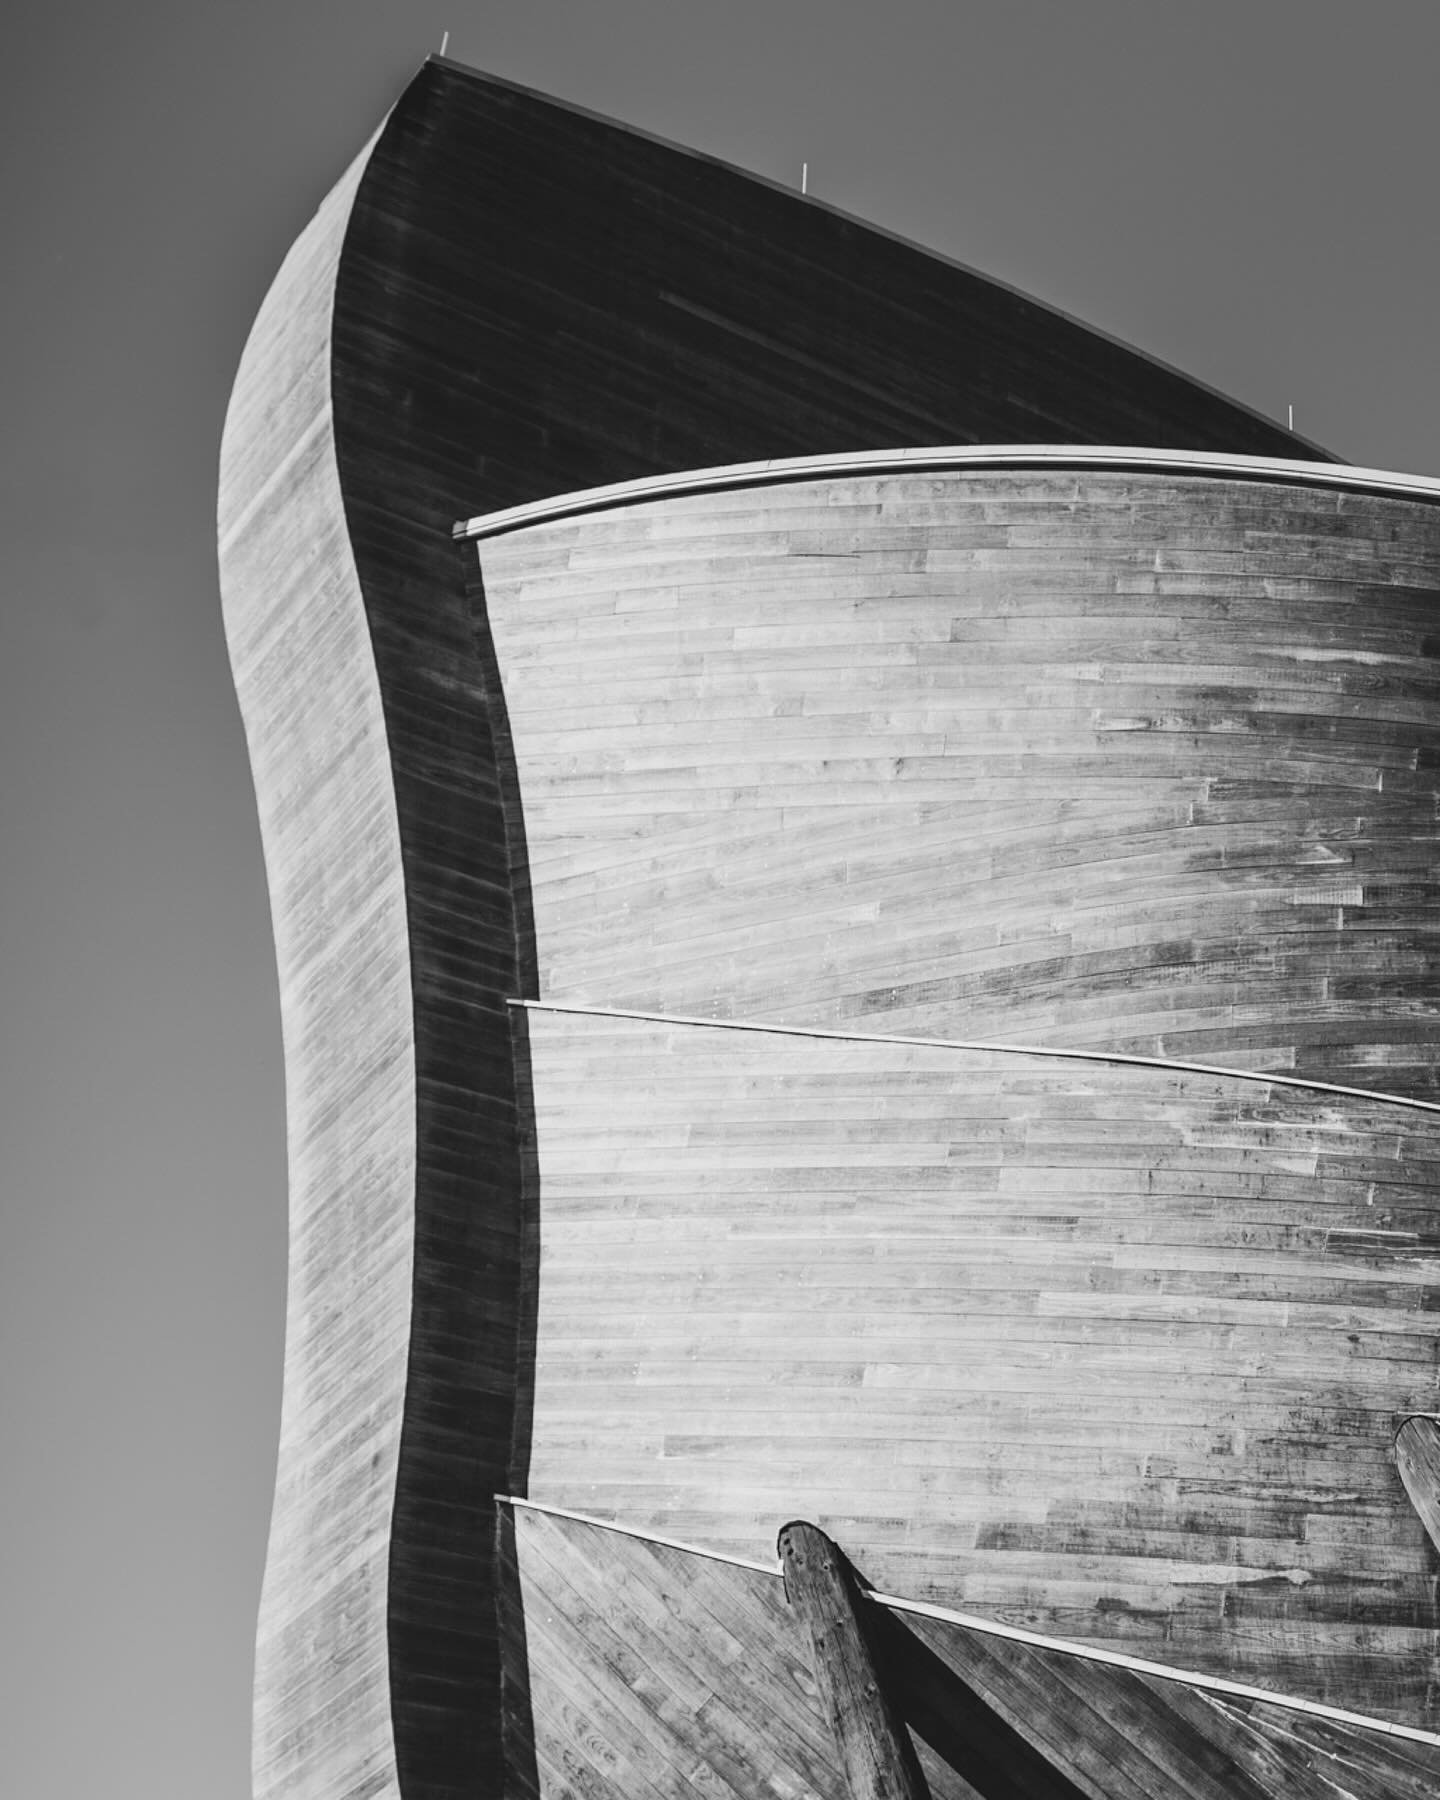 Places + Angles in Black + White 🖤 &bull; a little interesting architecture for your Thursday. &bull;
&bull;
PS, the first three images are of the Ark Encounter in Kentucky. This is a replication of Noah&rsquo;s Ark, built the way it was described i